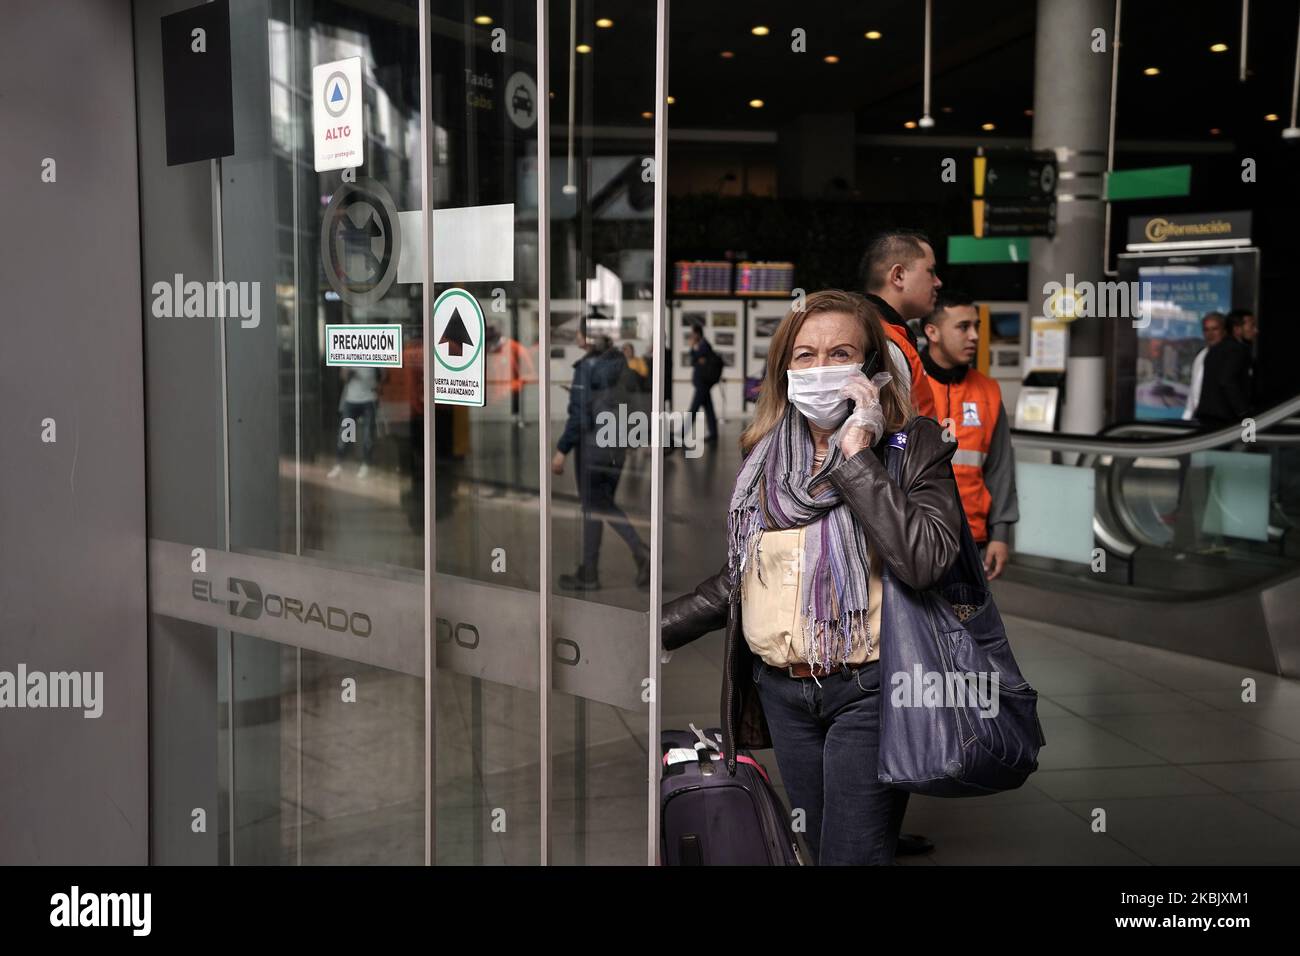 Travelers wearing face masks at Bogota's El Dorado airport in :Bogota, Colombia, on March 12, 2020. President of Colombia Ivan Duque has declared on Thursday 12th a health emergency to avoid the spread of the novel Coronavirus (COVID-19), the measures include a restriction on large gatherings larger than 500 people and prison visits, football matches will proceed behind closed doors, suspension of transit and disembarking cruise ships. (Photo by Diego Cuevas/NurPhoto) Stock Photo